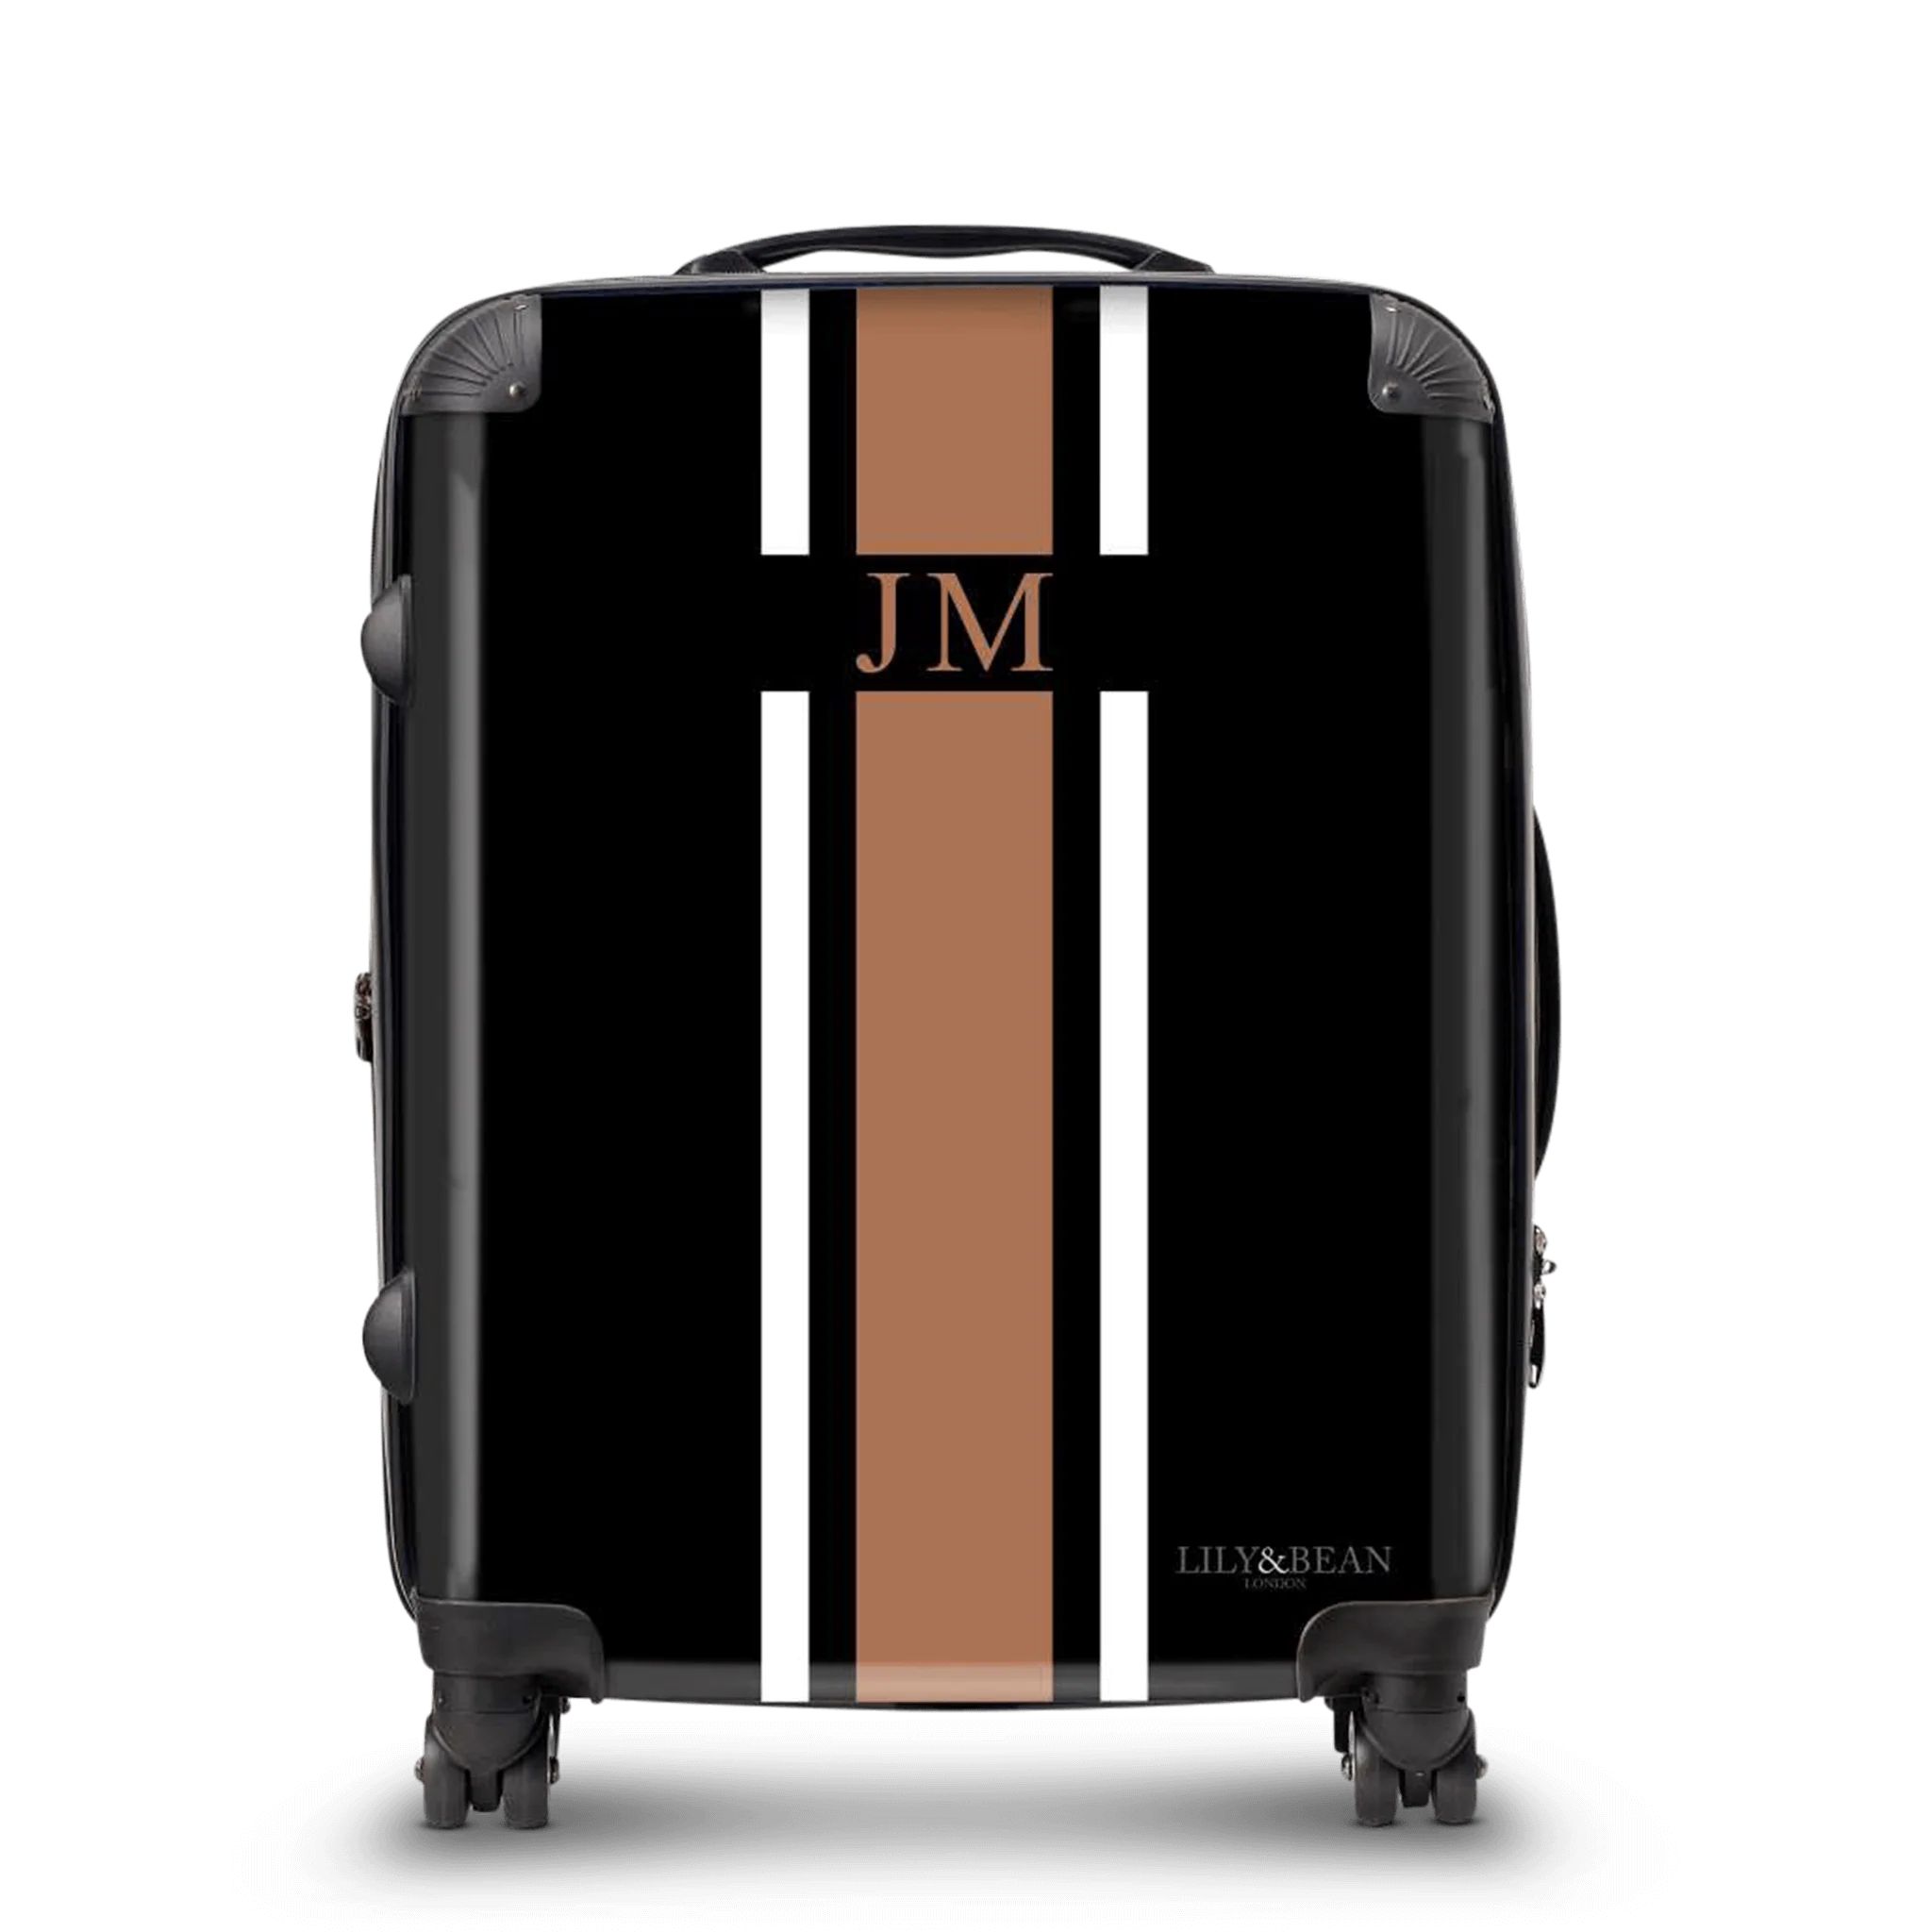 Lily & Bean personalised Black with Tan Luggage All Sizes | Lily and Bean